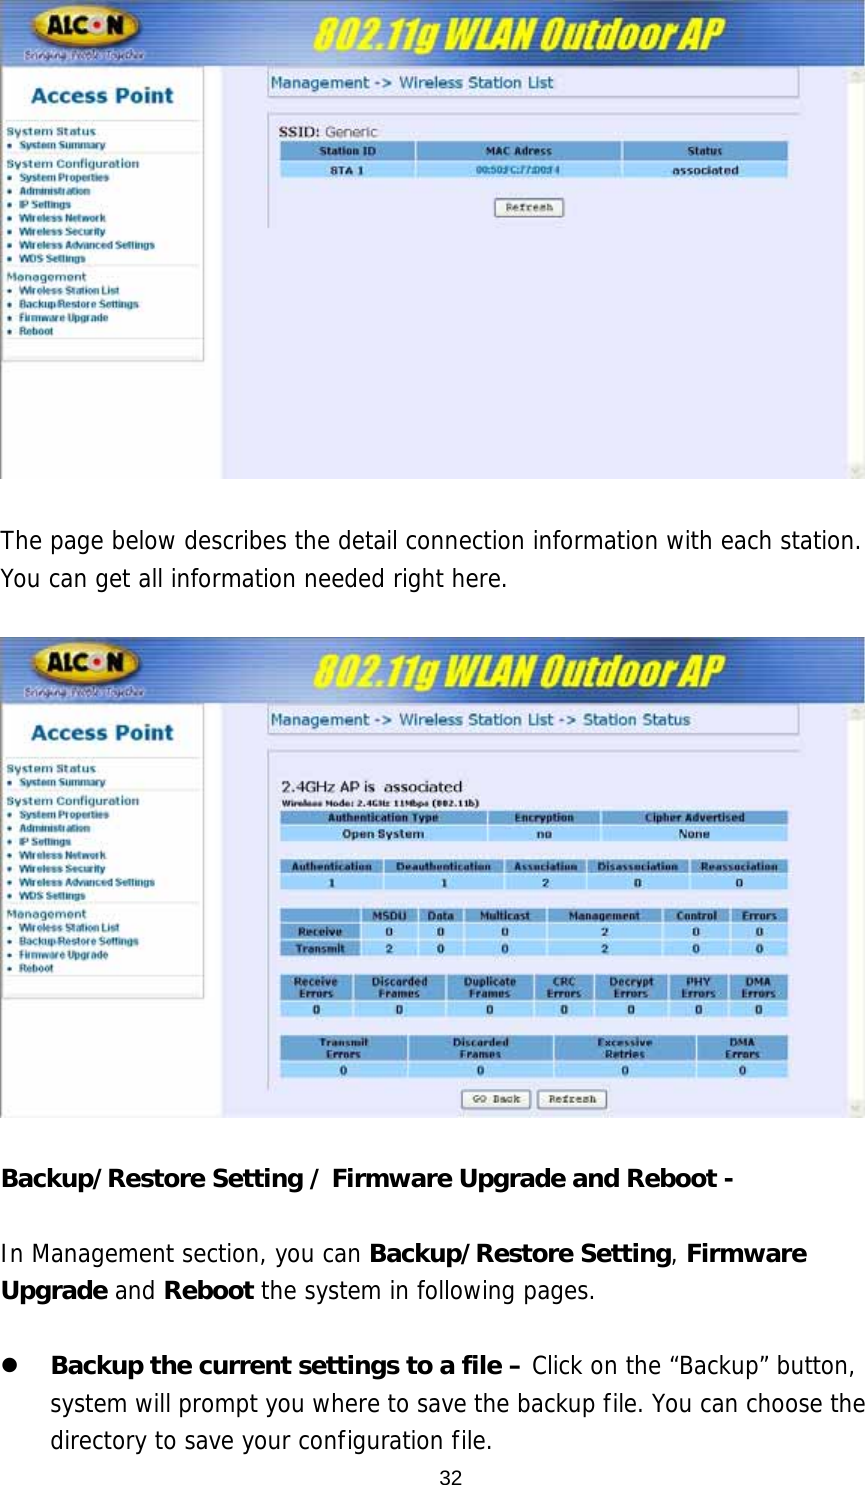   The page below describes the detail connection information with each station. You can get all information needed right here.    Backup/Restore Setting / Firmware Upgrade and Reboot -    In Management section, you can Backup/Restore Setting, Firmware Upgrade and Reboot the system in following pages.  z Backup the current settings to a file – Click on the “Backup” button, system will prompt you where to save the backup file. You can choose the directory to save your configuration file.   32